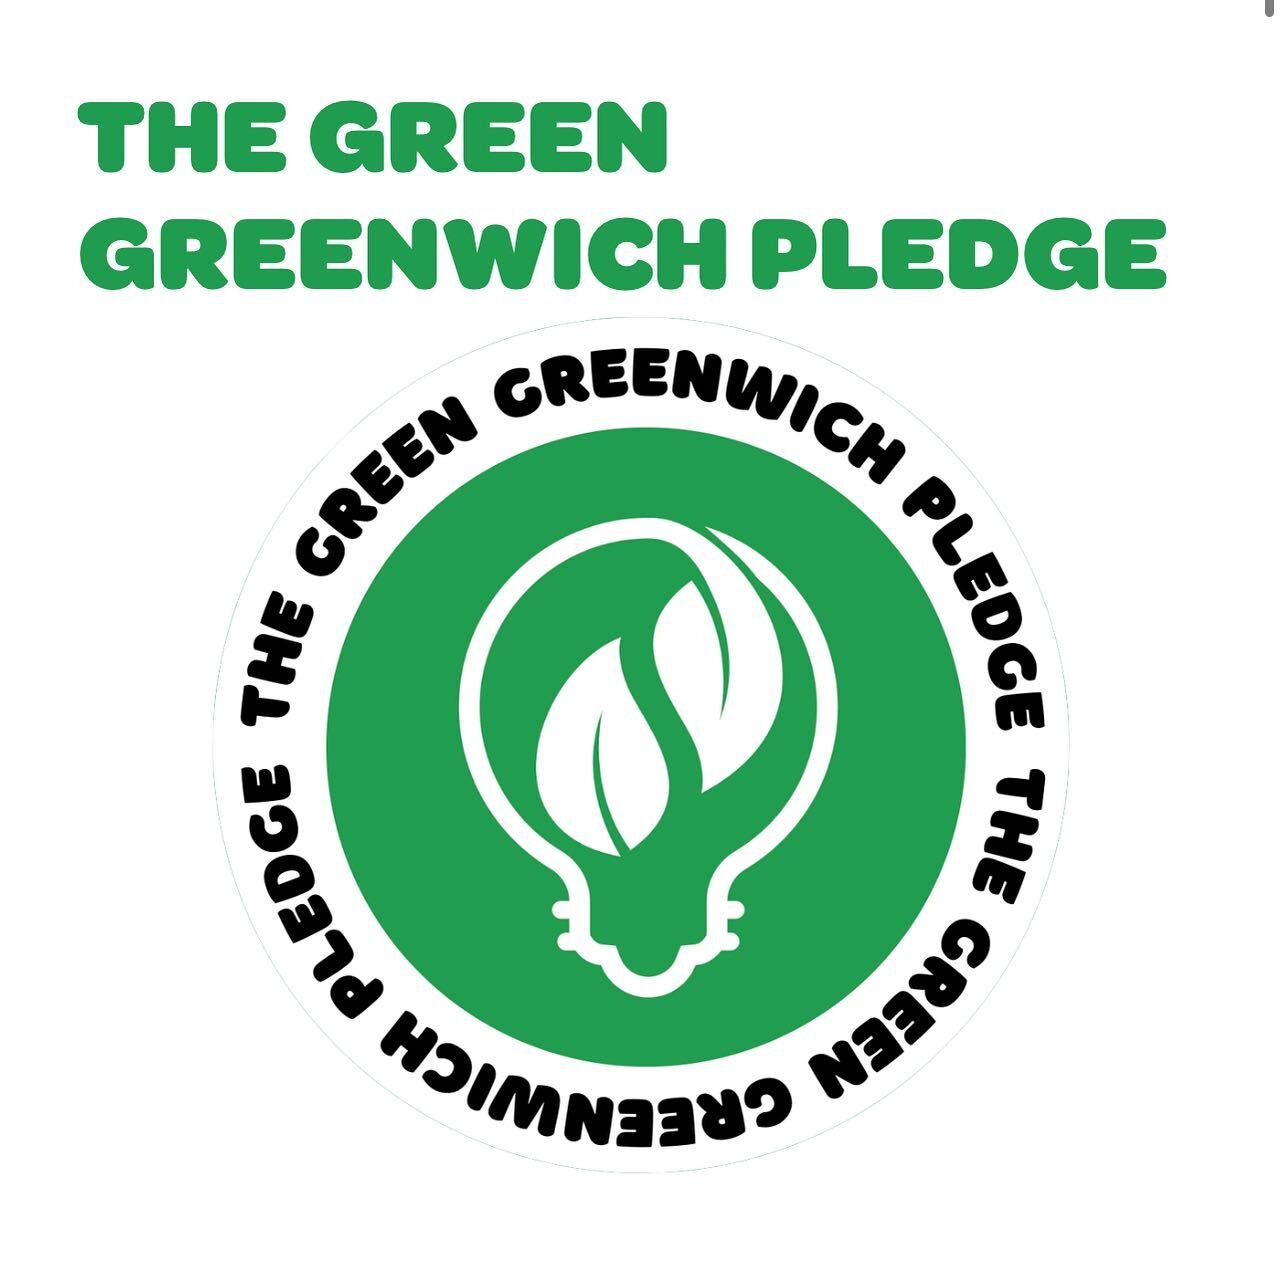 The pledge aims to normalize and celebrate an attitude of adjusting our lifestyles to serve a larger purpose: protecting our environment. 

We are inviting Greenwich businesses to take the pledge. Each business makes a commitment to adopting new sust